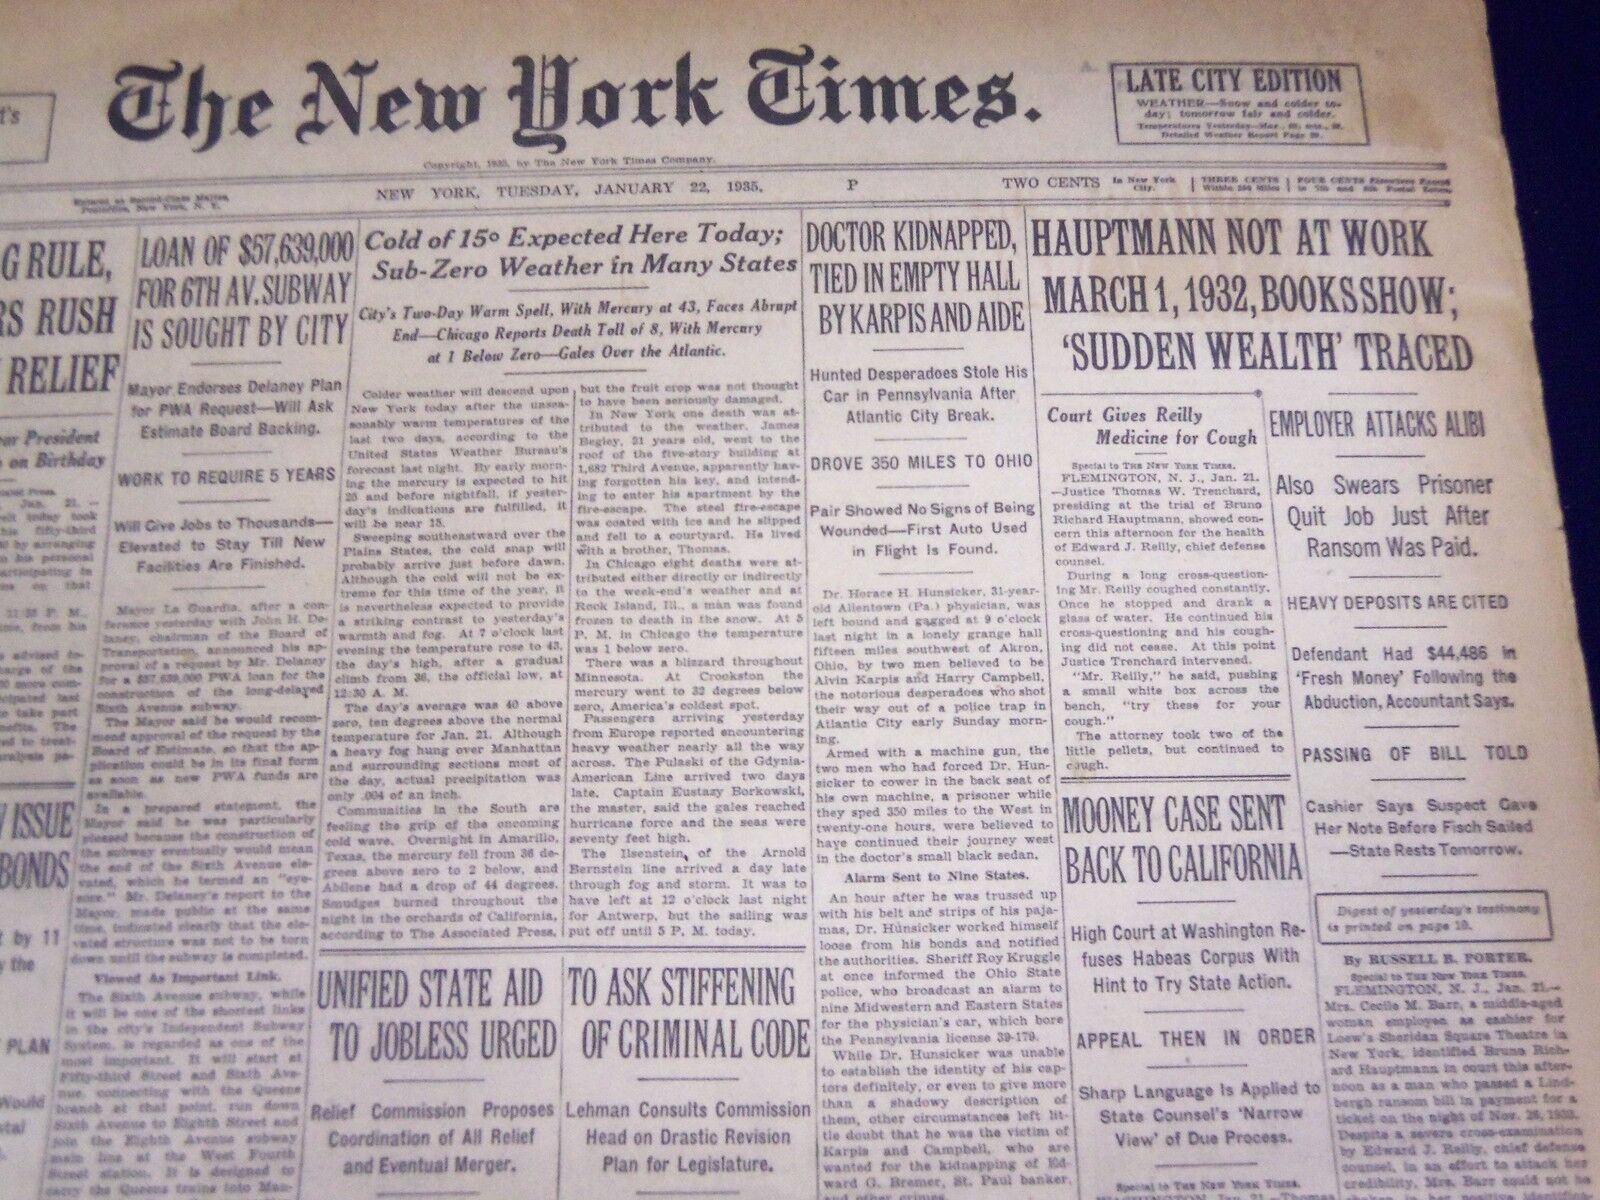 1935 JANUARY 22 NEW YORK TIMES - HAUPTMANN NOT AT WORK MARCH 1 1932 - NT 3824